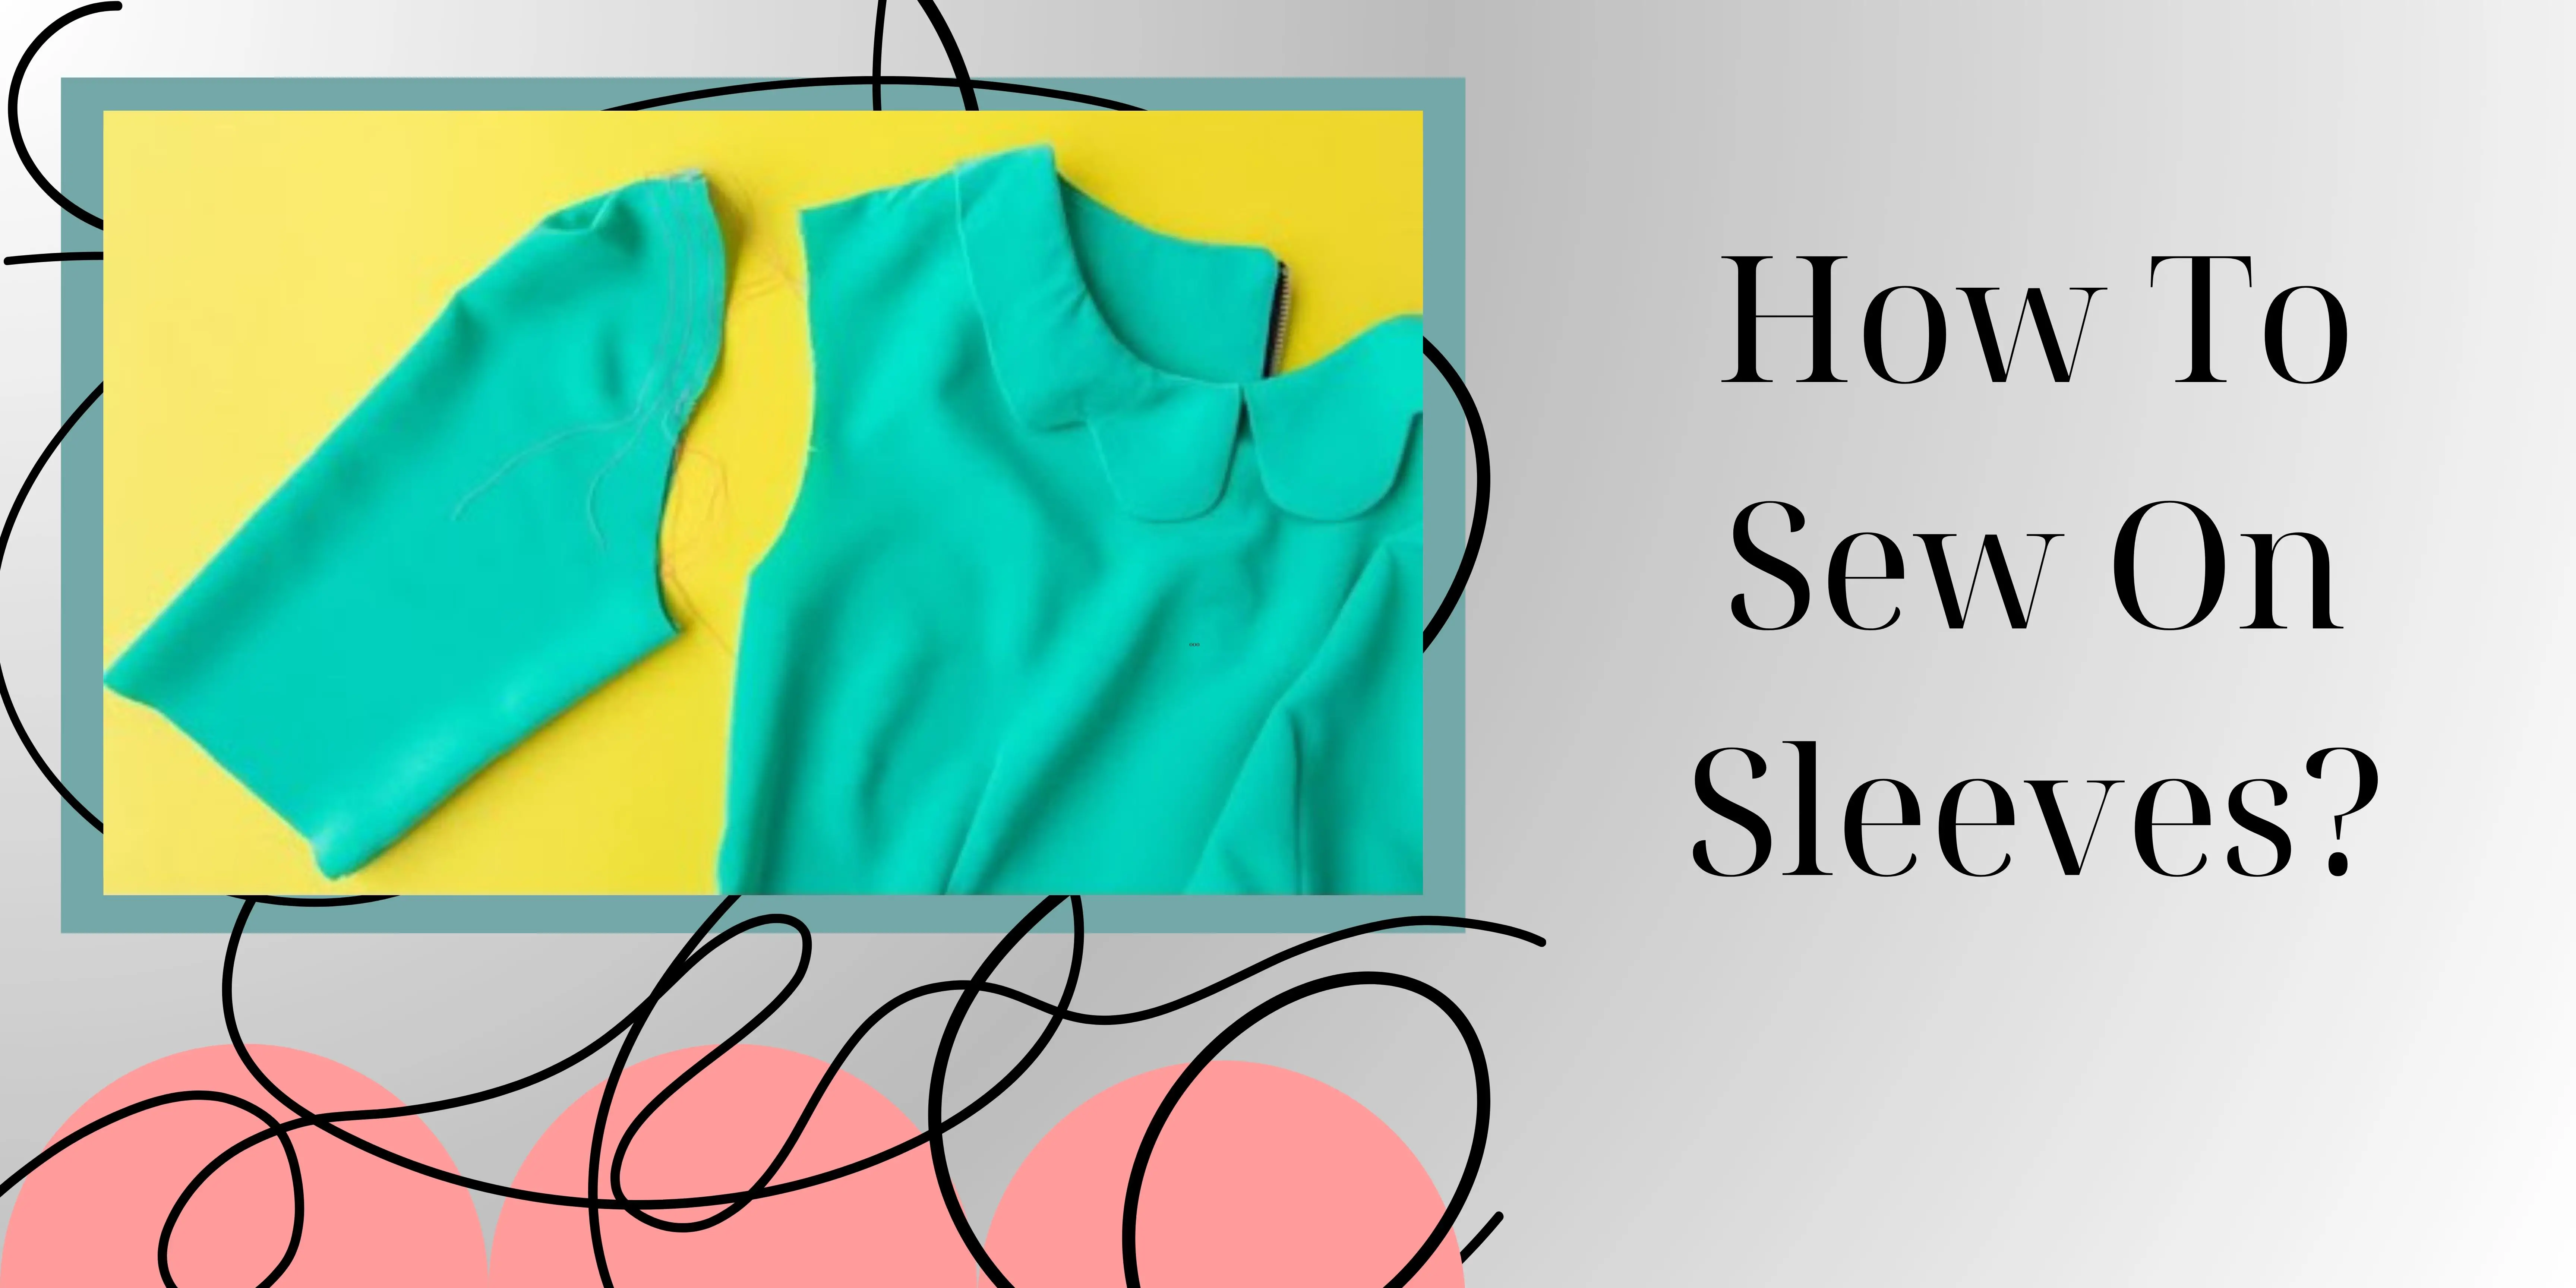 How To Sew On Sleeves?